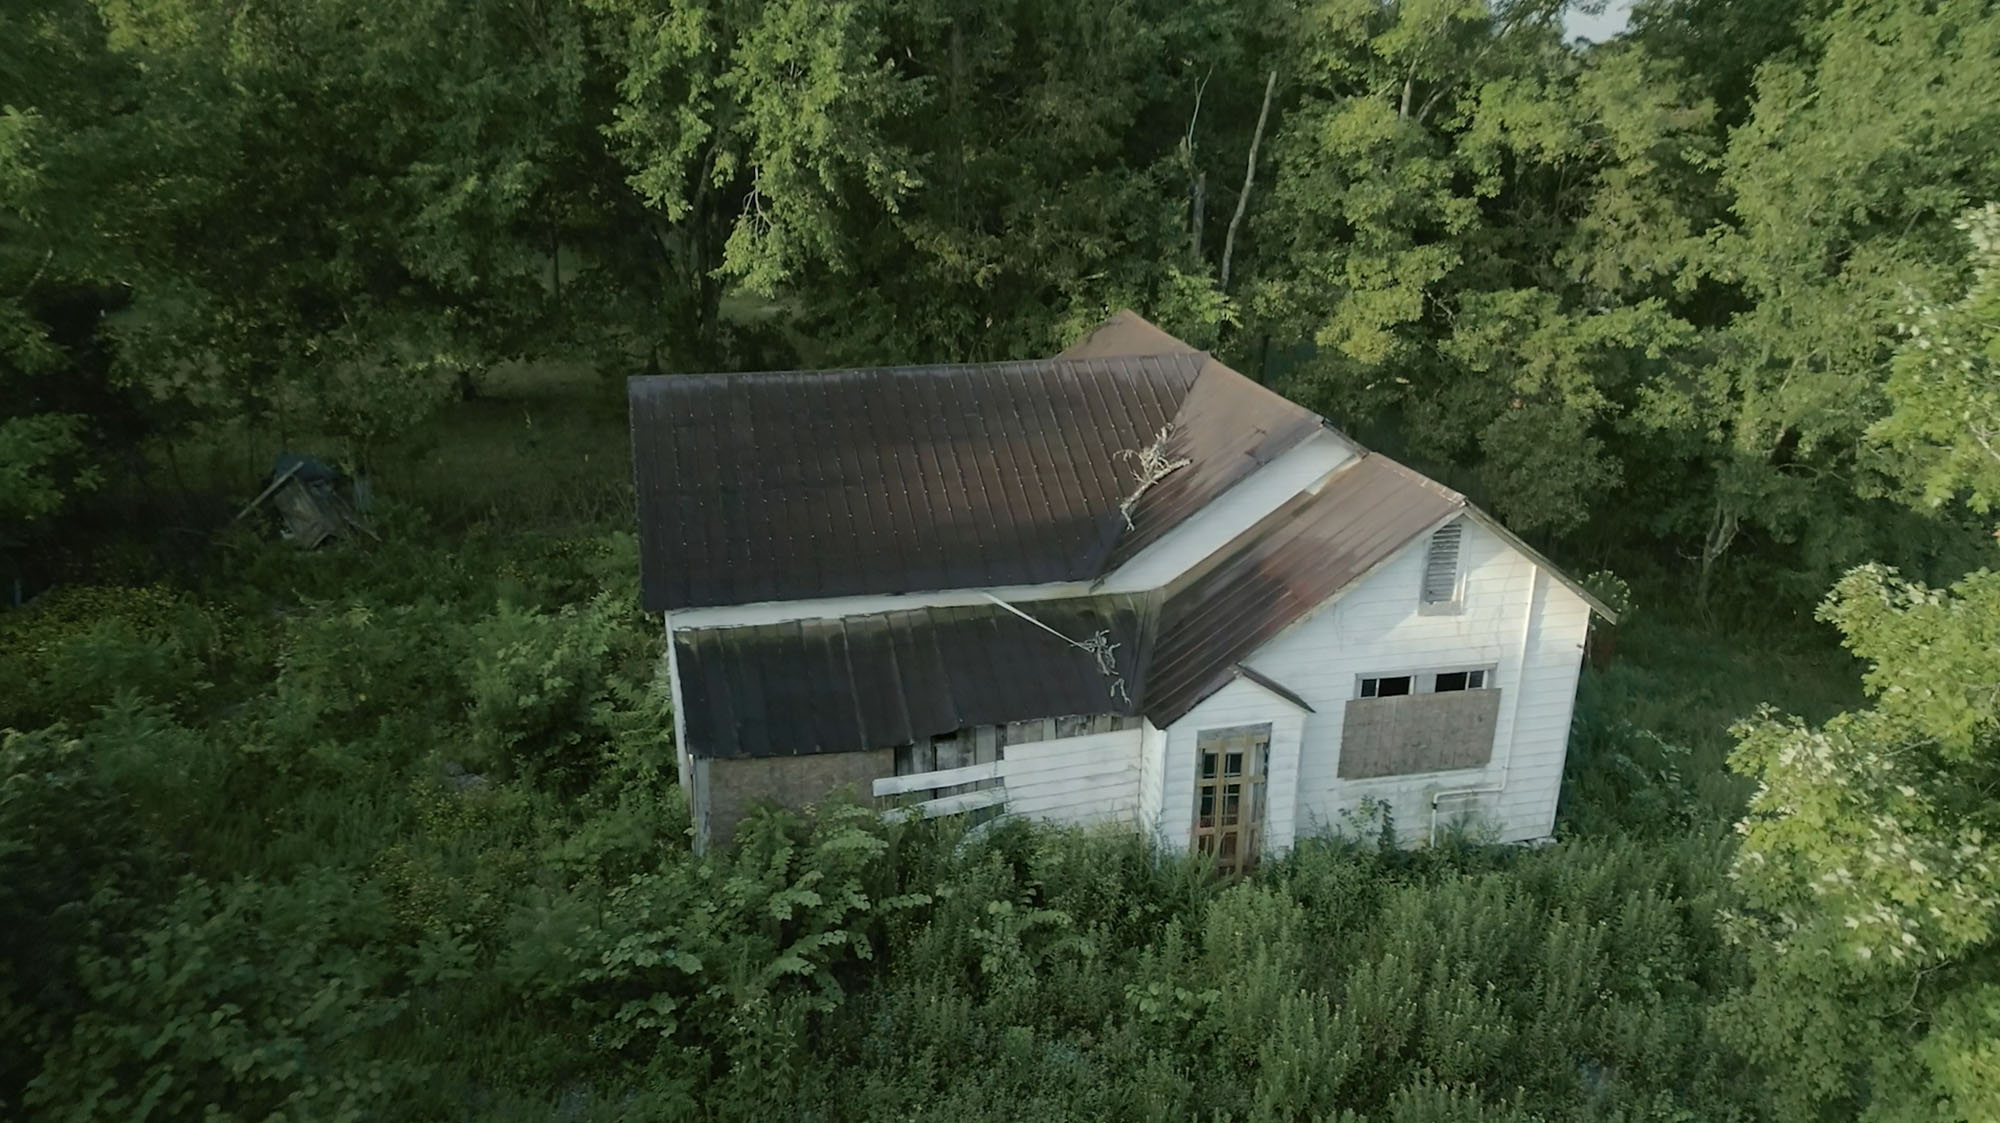 In production: The story of Tennessee’s lost Rosenwald School